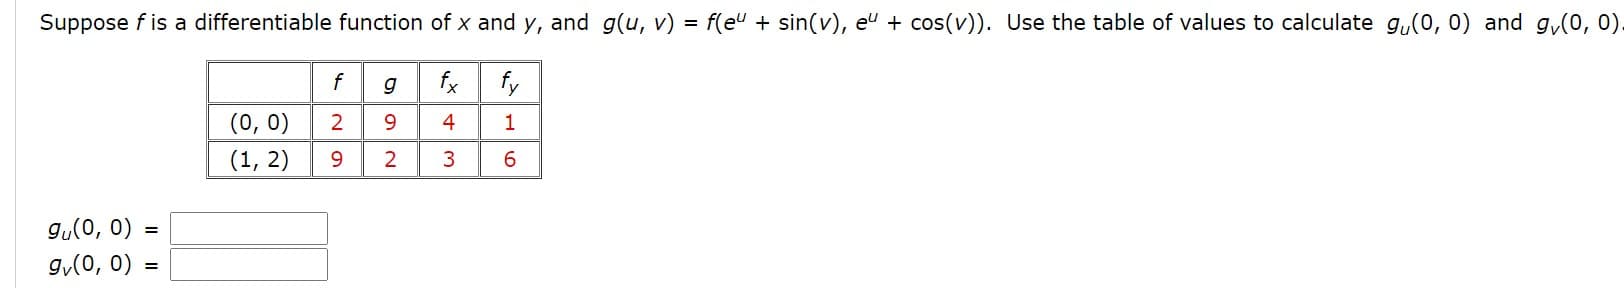 Suppose f is a differentiable function of x and y, and g(u, v) = f(e" + sin(v), eu + cos(v)). Use the table of values to calculate g,(0, 0) and g,(0, 0
g
fx fy
(0, 0)
2
9.
4
1
(1, 2)
9.
3
gu(0, 0)
=
gy(0, 0)
